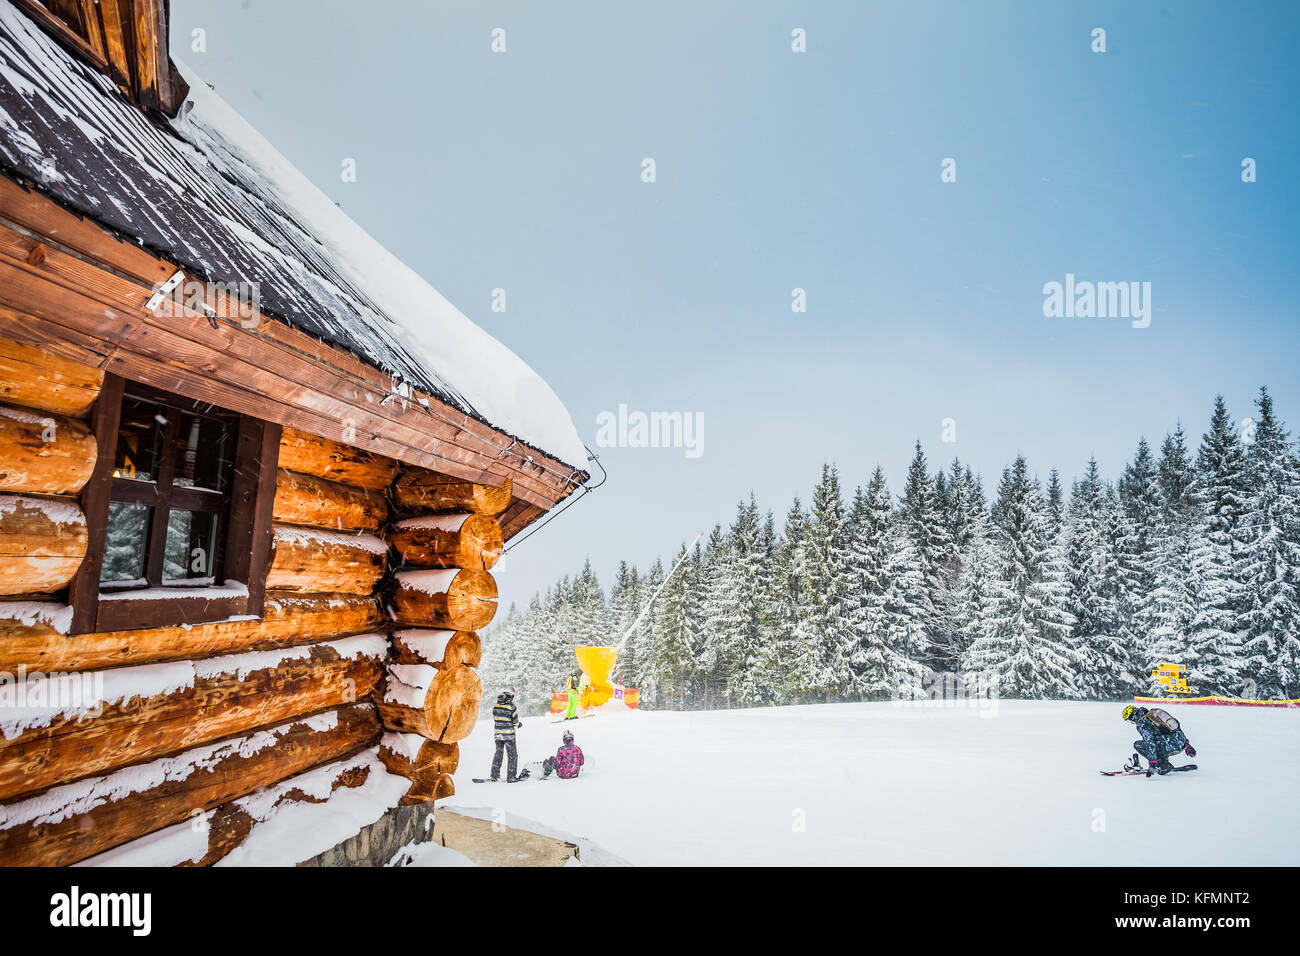 Winter vacation holiday wooden house in mountains Stock Photo